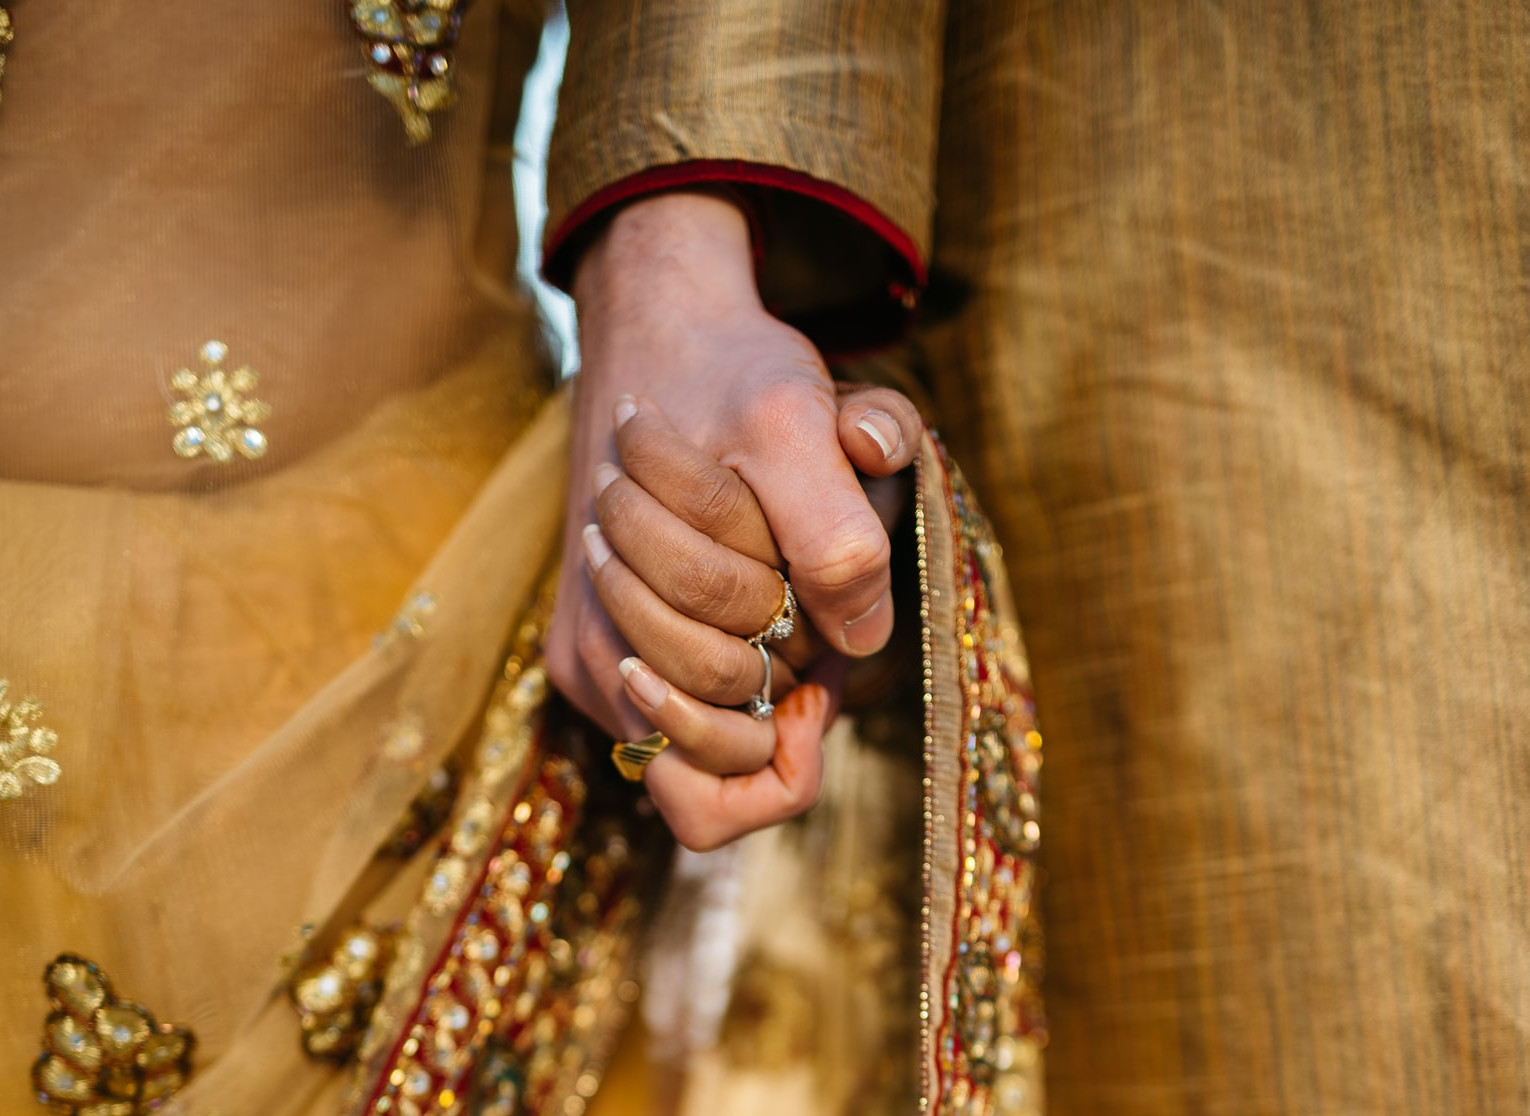 Indian Man Sues In-Laws After Discovering That Newlywed “Wife” Is Transgender